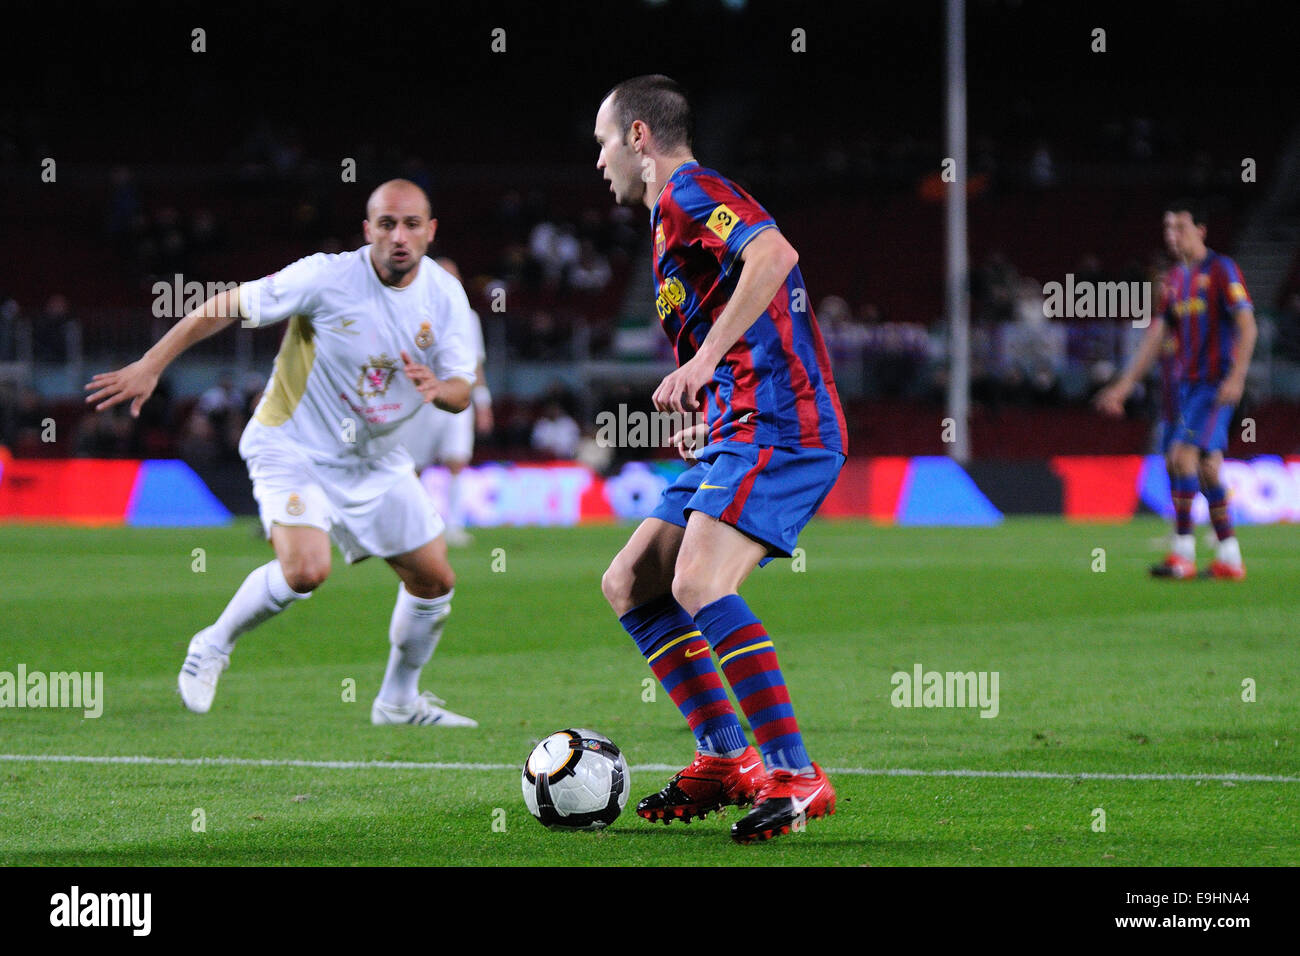 BARCELONA - NOV 10: Andres Iniesta, F.C Barcelona player, plays against Cultural Leonesa at the Camp Nou Stadium. Stock Photo